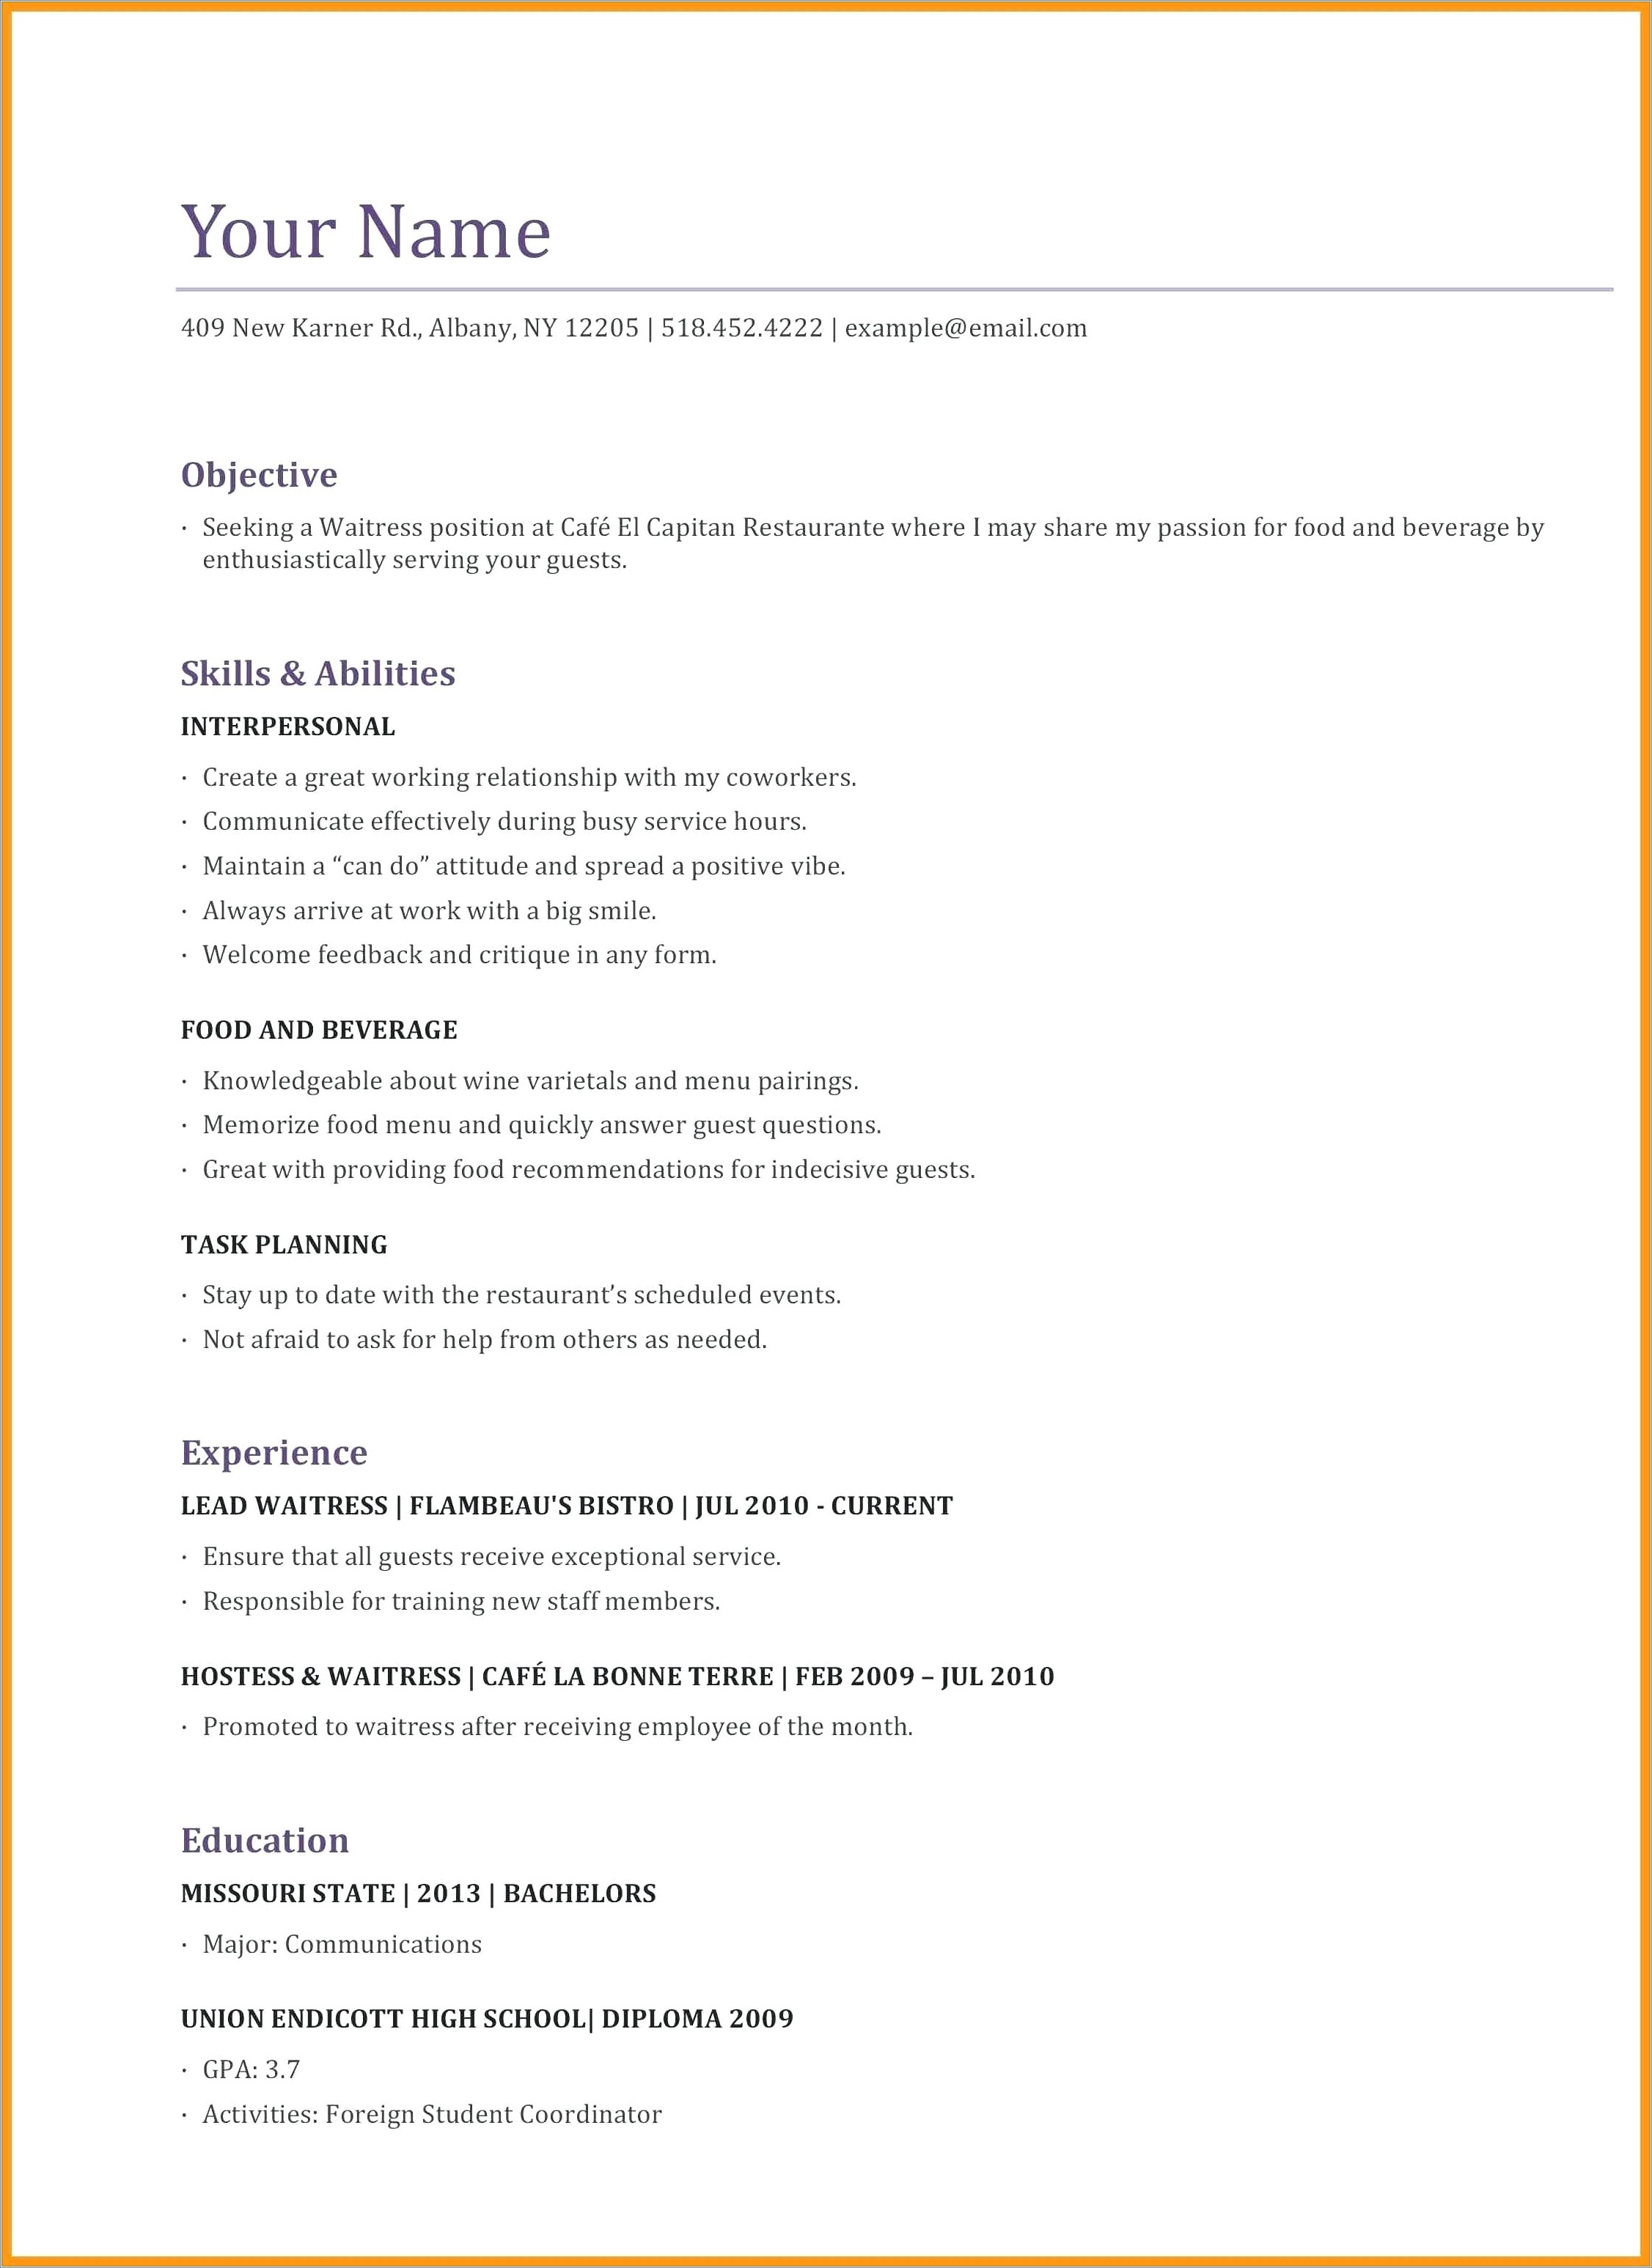 Example Of A Resume For A Waitress Job